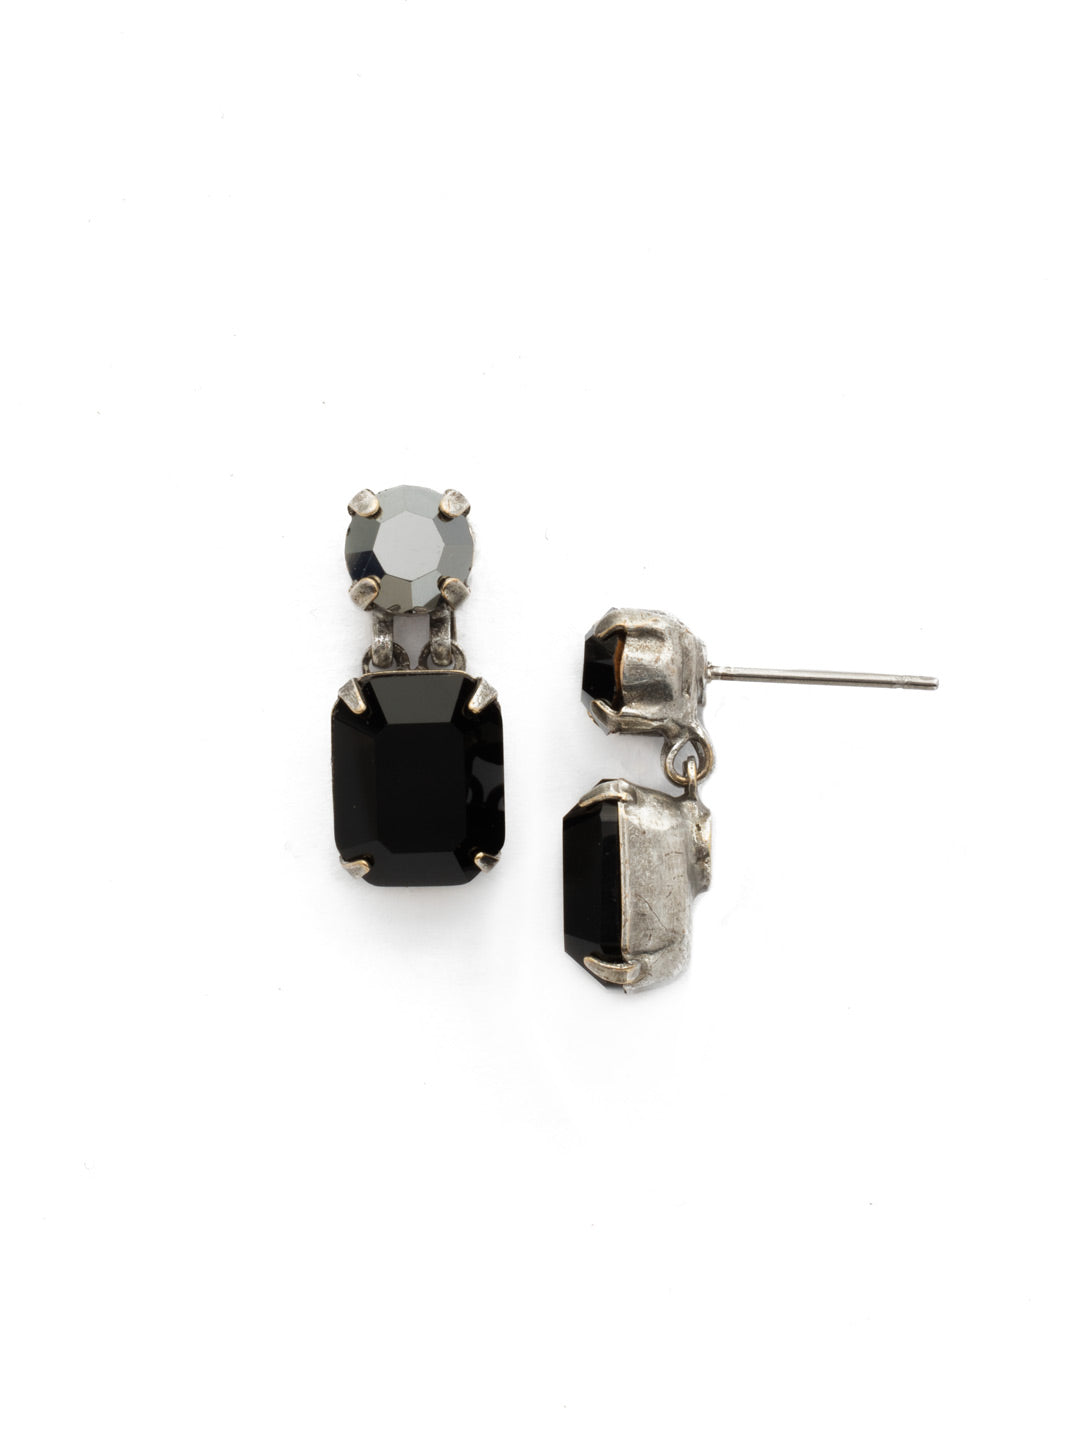 Crystal Octagon and Round Stud Earrings - ECW7ASBON - <p>We took a classic post earring and gave it that little bit of needed dimension! These earrings feature a sleek octagon attached to a round crystal post. They pair perfectly with our Crystal Octagon Classic necklace. From Sorrelli's Black Onyx collection in our Antique Silver-tone finish.</p>